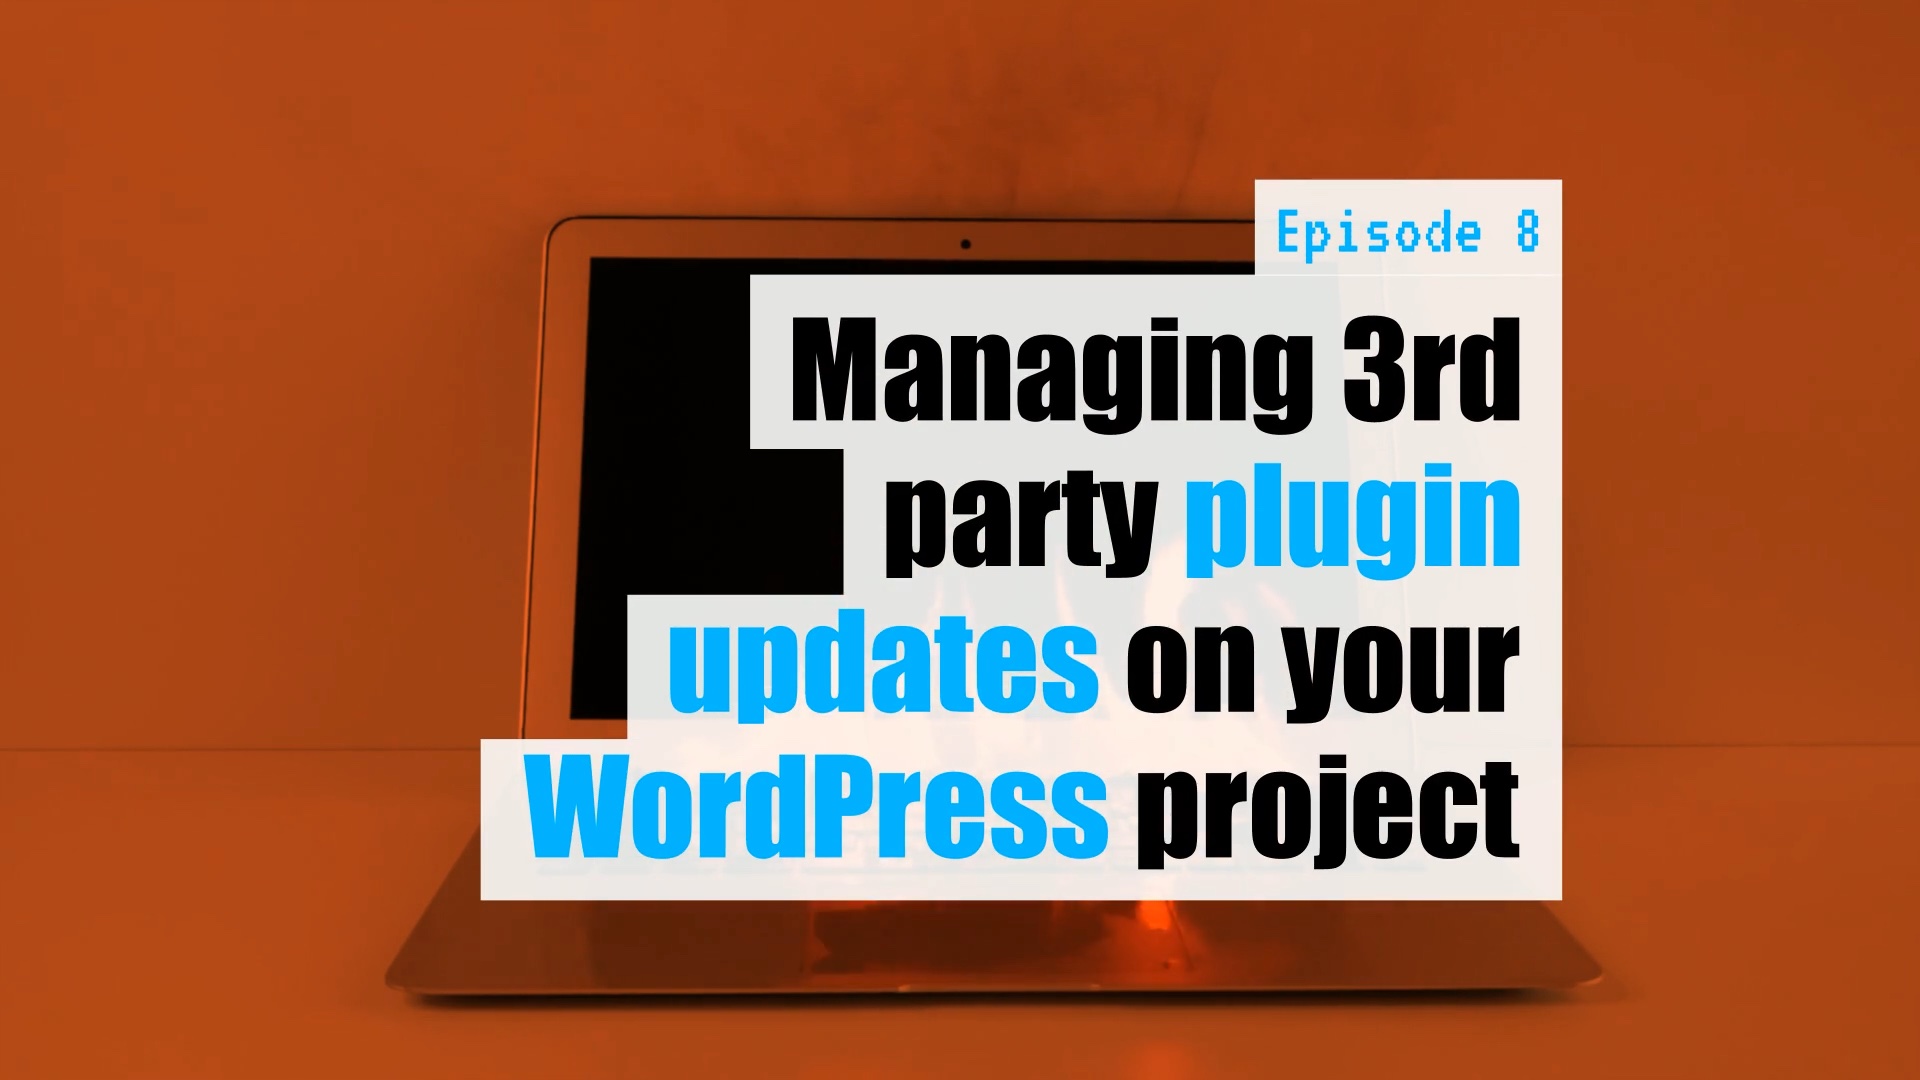 EP08 – Managing 3rd party plugin updates on your WordPress project